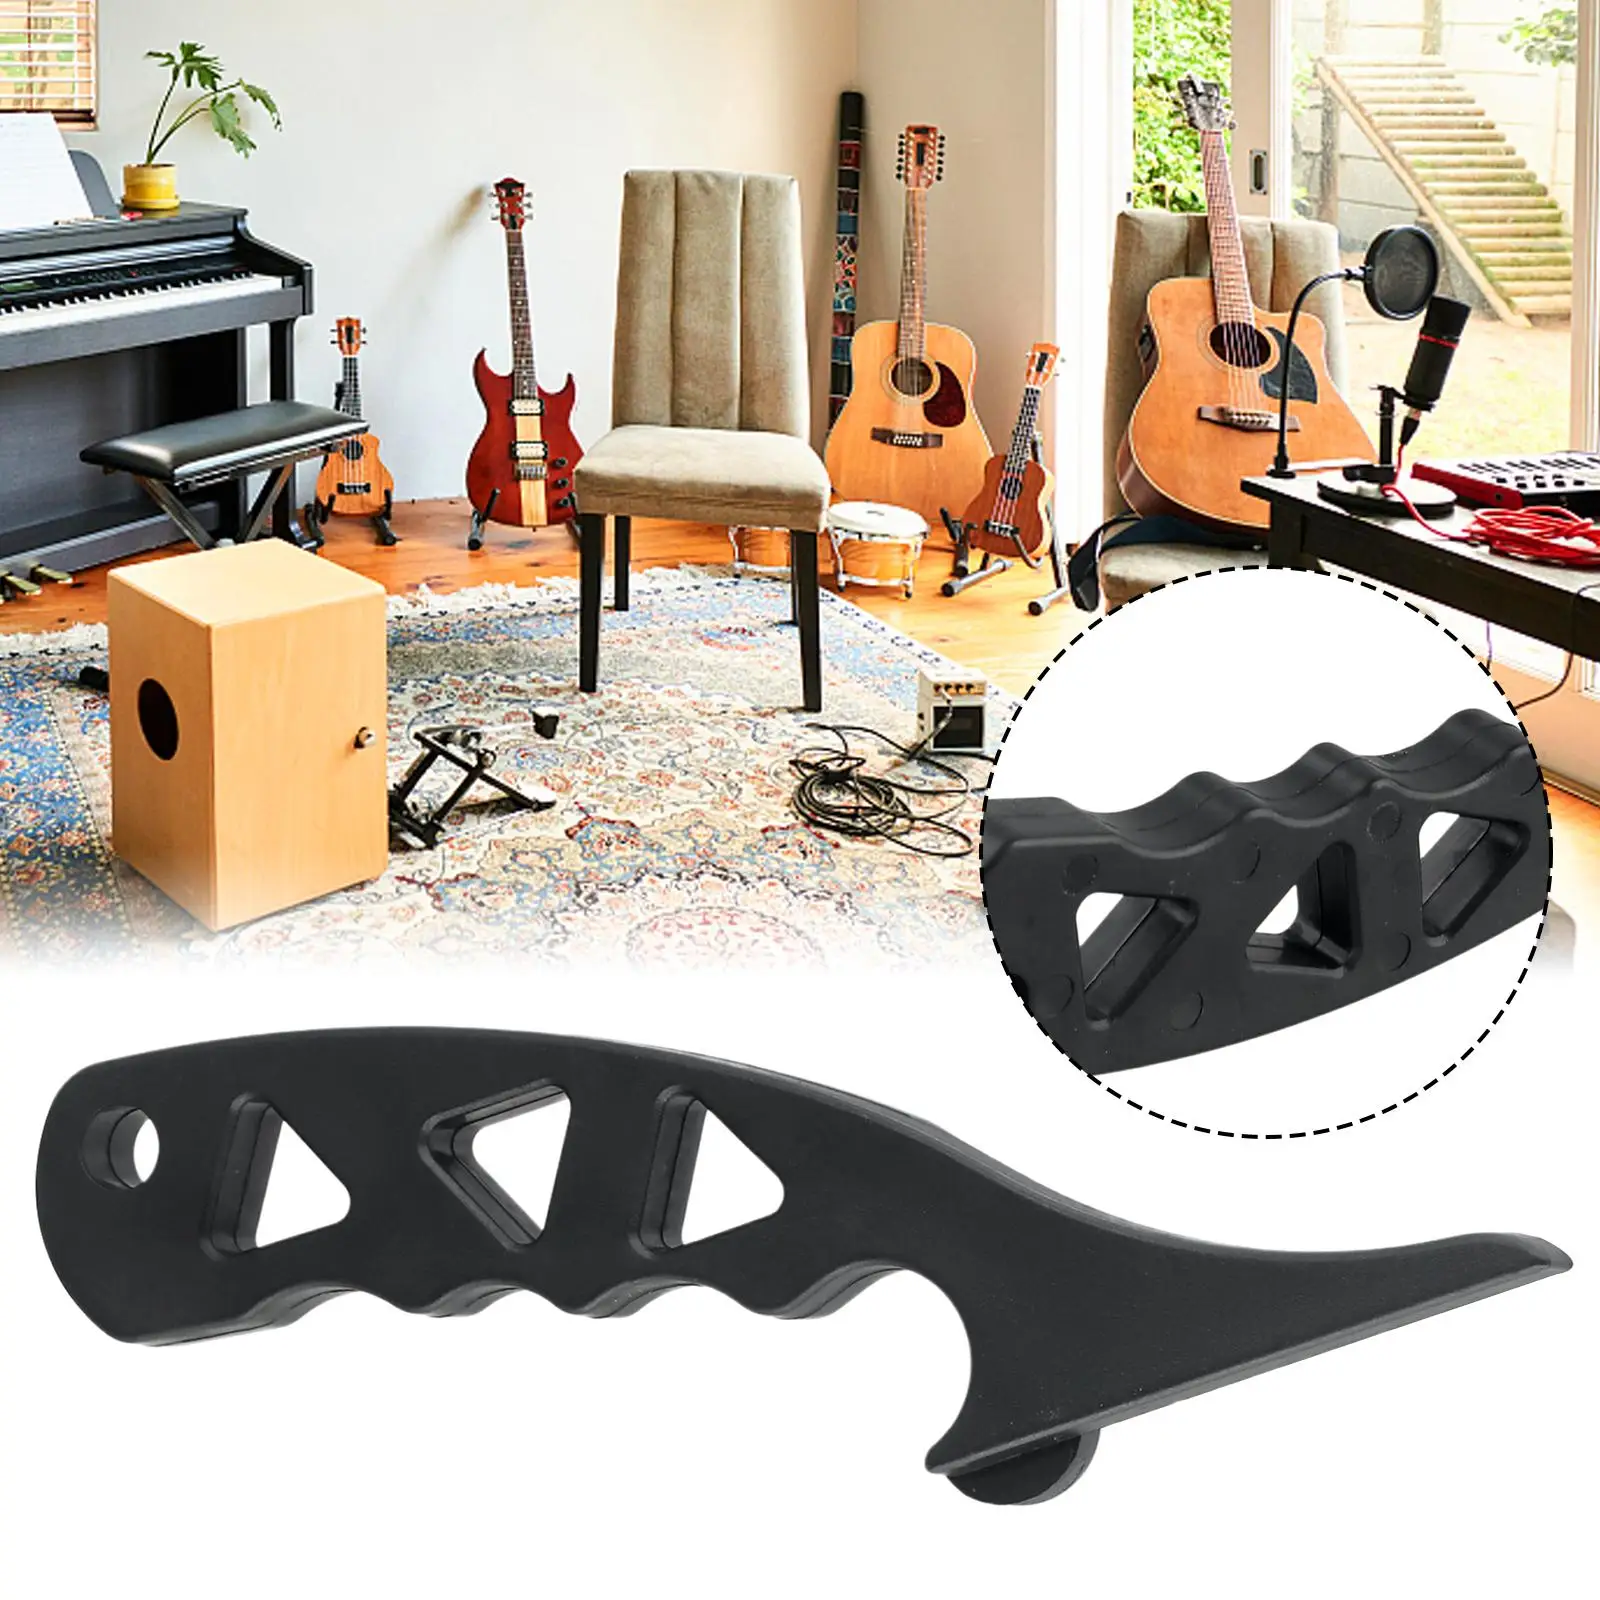 

1pc Guitar String Stretcher Make New String Stay In Tune Instantly Tuning Tools 16.5x4.5cm Guitars Repair String Stretching Tool